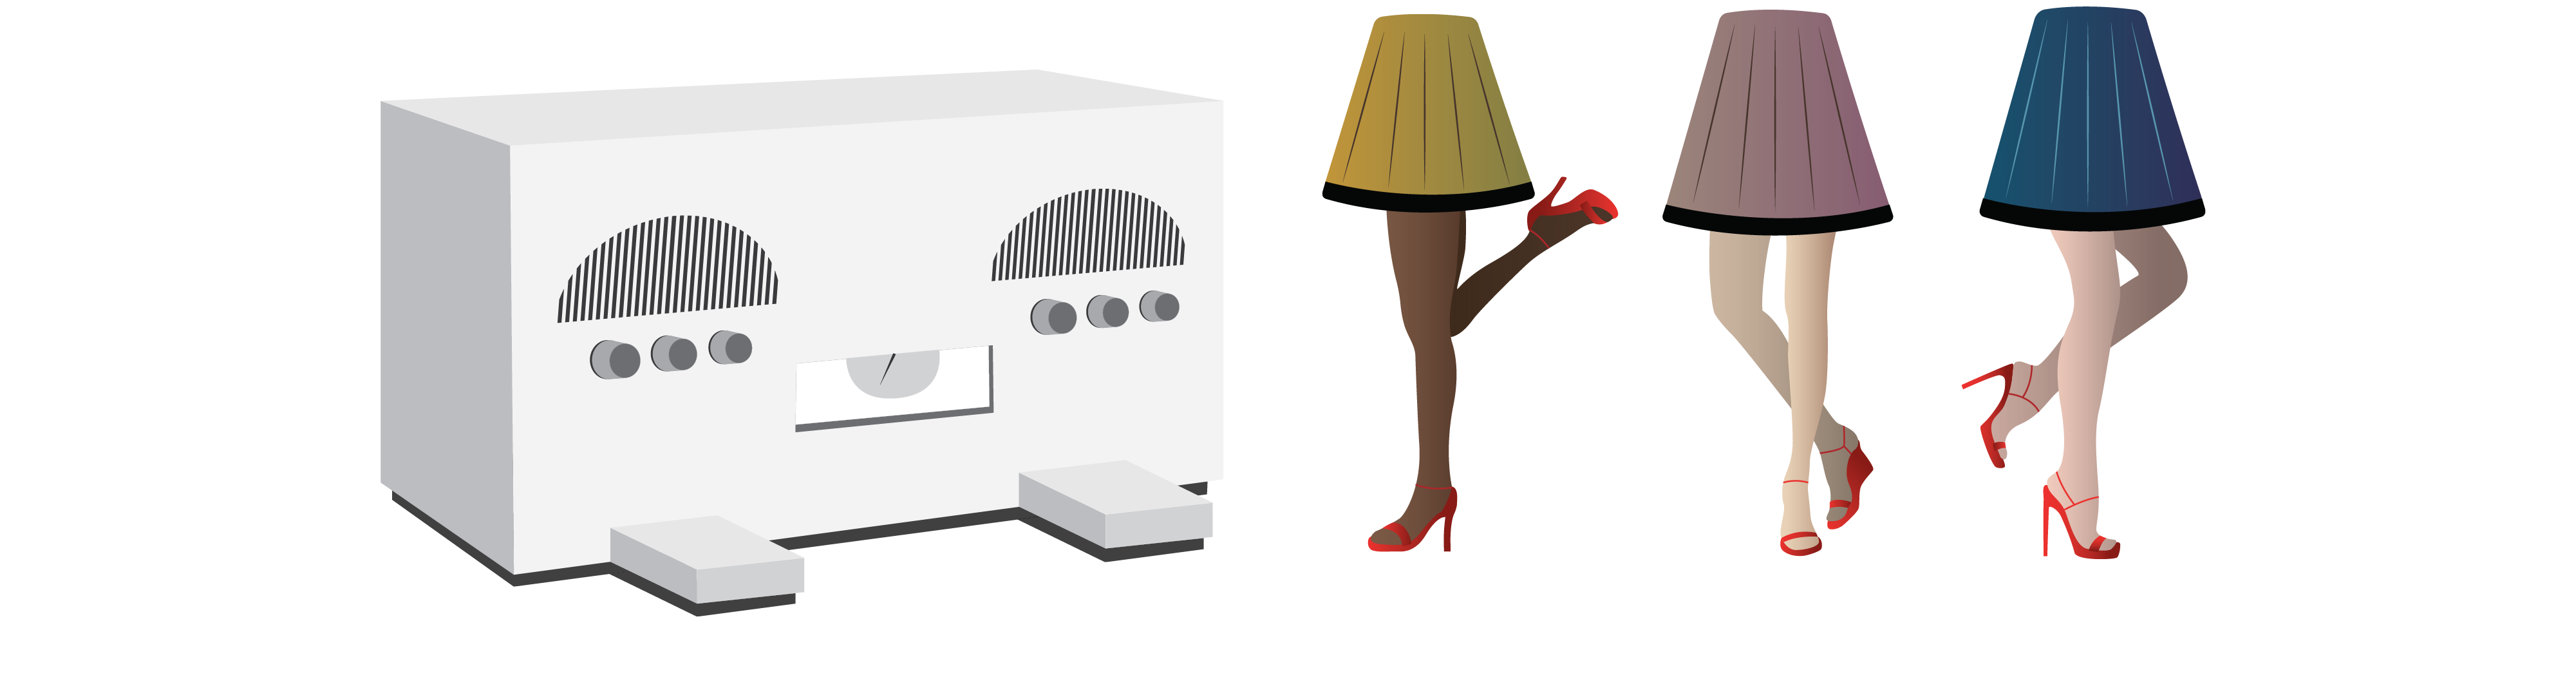 On the left, a grey vintage-style radio showcases anthropometric features, including two rounded speakers near the top, shaped like eyes. Underneath the speaker, a display resembles a mouth with a tongue. At the bottom of the unit are two components, which could be interpreted as representing arms or feet. To the right of the radio, 3 similar lamps showcase human-like features: the lampshades resemble pleated skirts and are green, purple, and blue. The tubing of the lamps resemble thin legs and the base of the lamp are feet with red high heels.